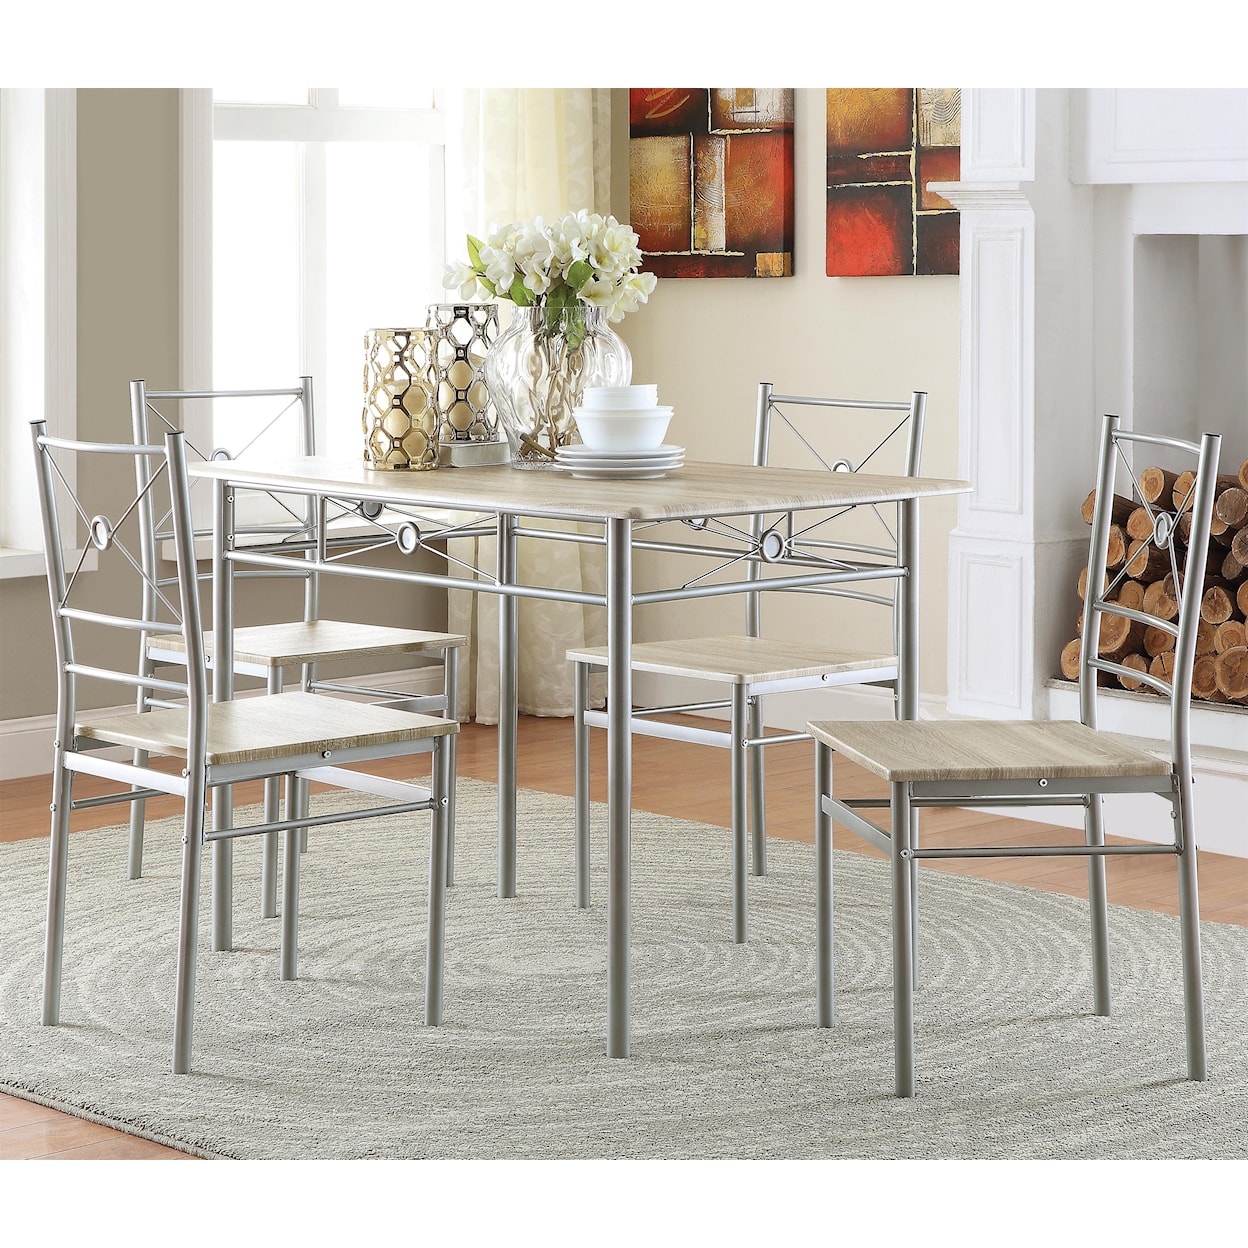 Coaster 100035 5pc Dining Room Group